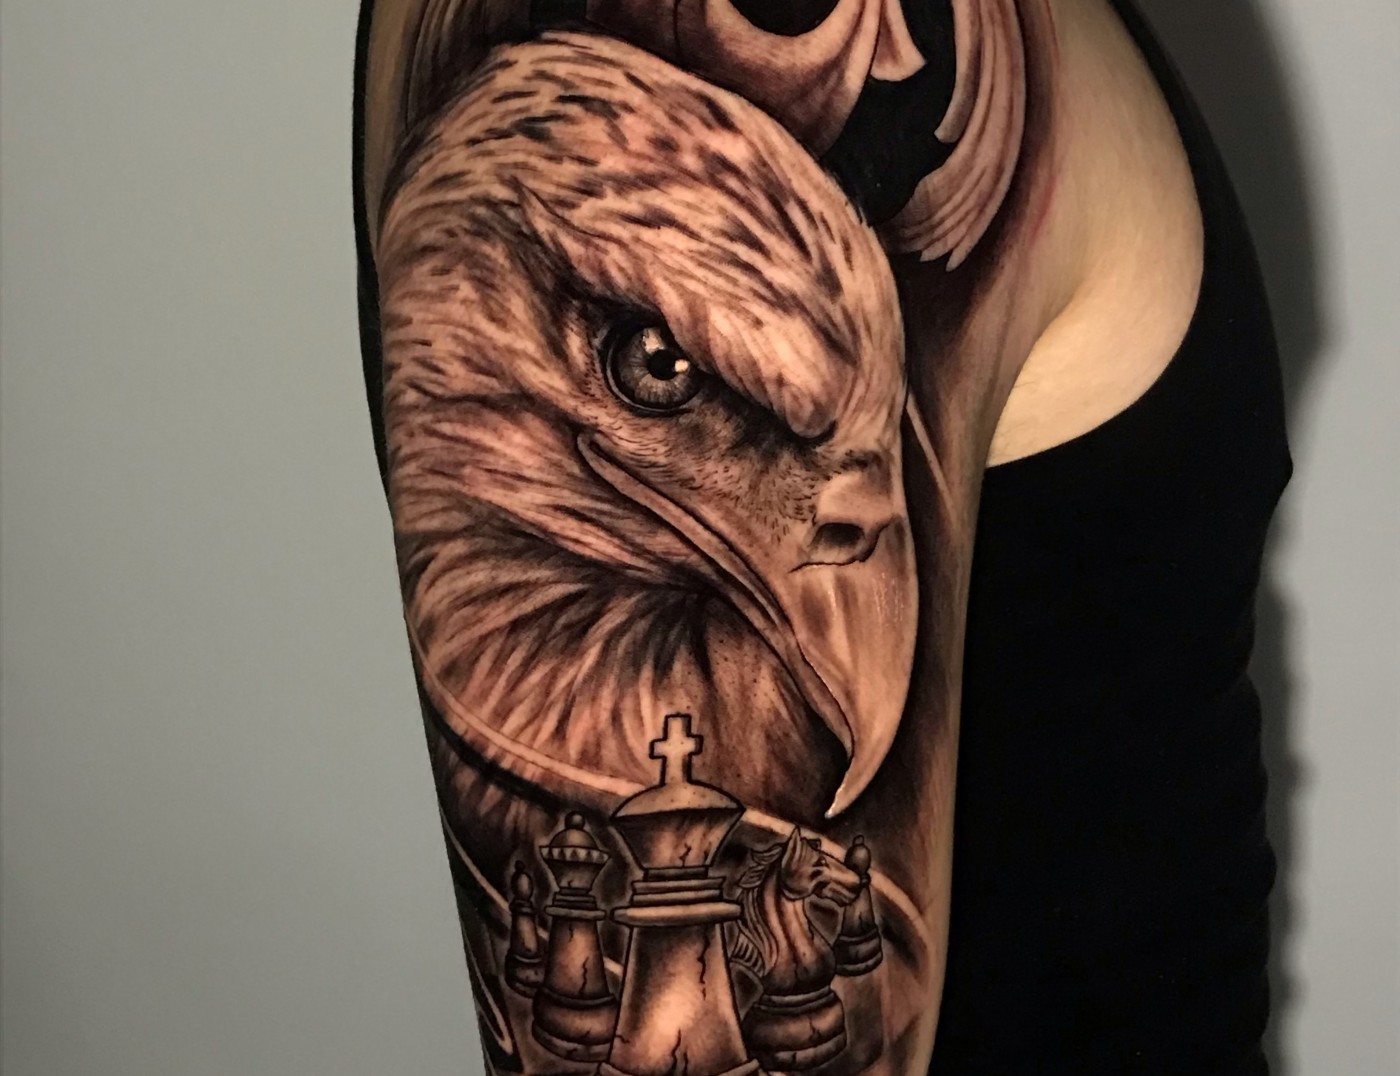 'Eagle, Chess, and Waves' Blackwork Tattoo by Rene Cristobal. This piece was done by Rene while still in Concepcion, Chile at his Alma Marta, Vision Tattoo Studio. Rene specializes in blackwork and black & gray realism tattoos. Stop by Iron Palm for a free consultation.